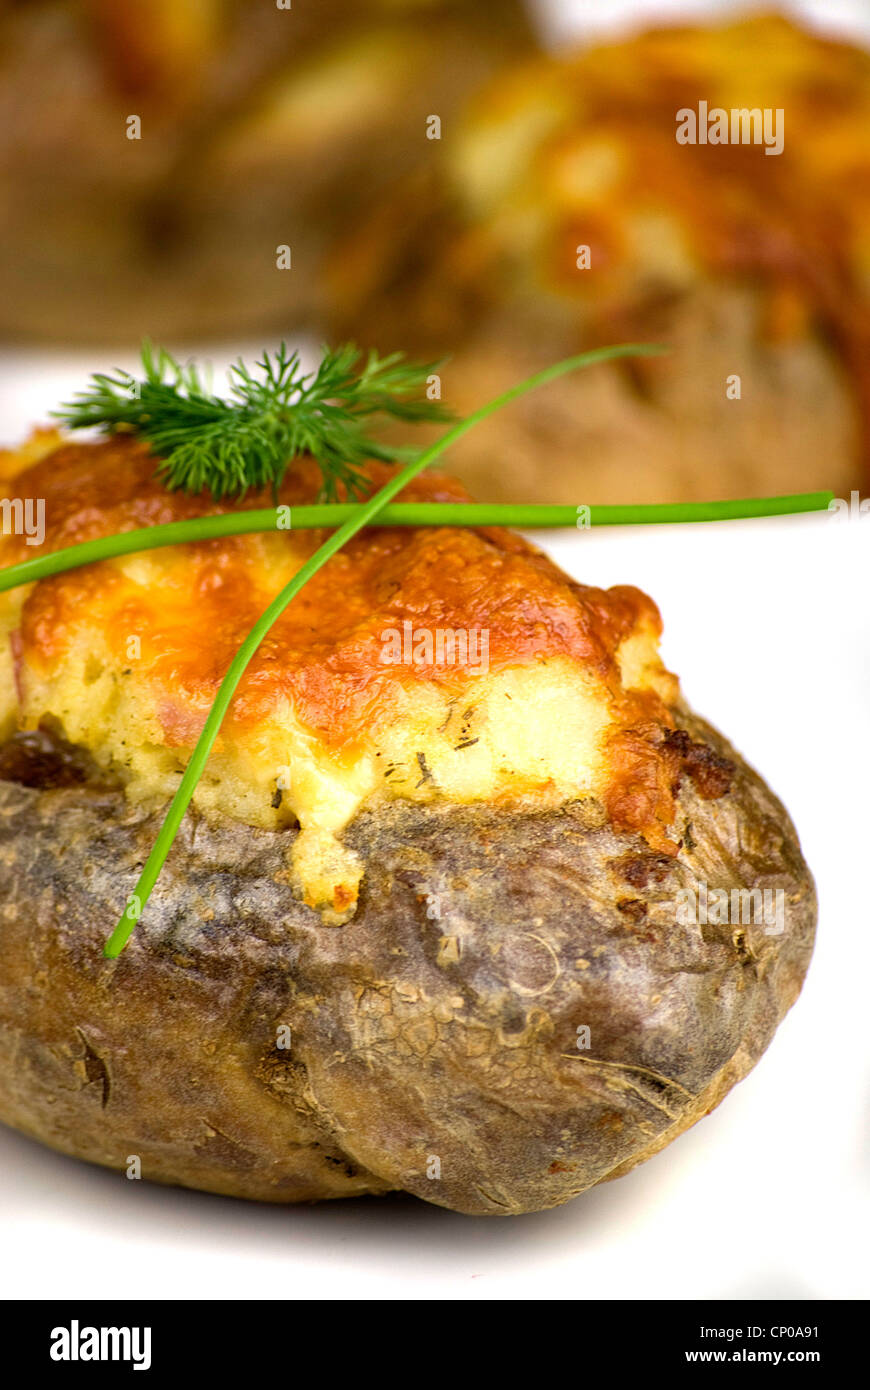 stuffed potatoes covered with cheddar cheese decorated with chives and dill leaves in a white plate Stock Photo